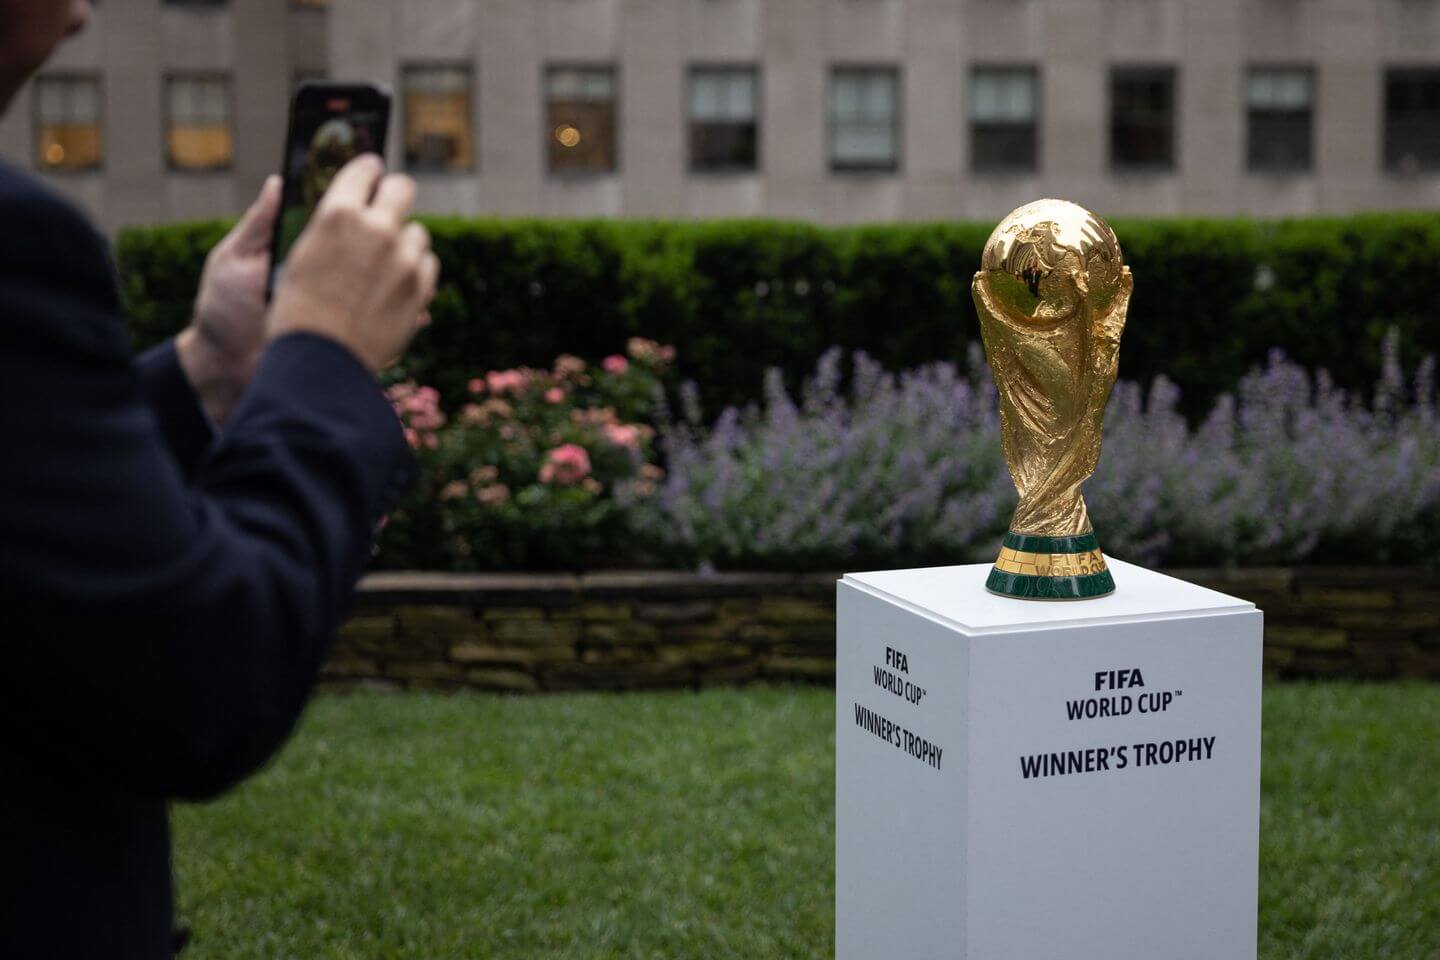 World Cup 2026 schedule announcement live updates: Latest as FIFA selects host city for final